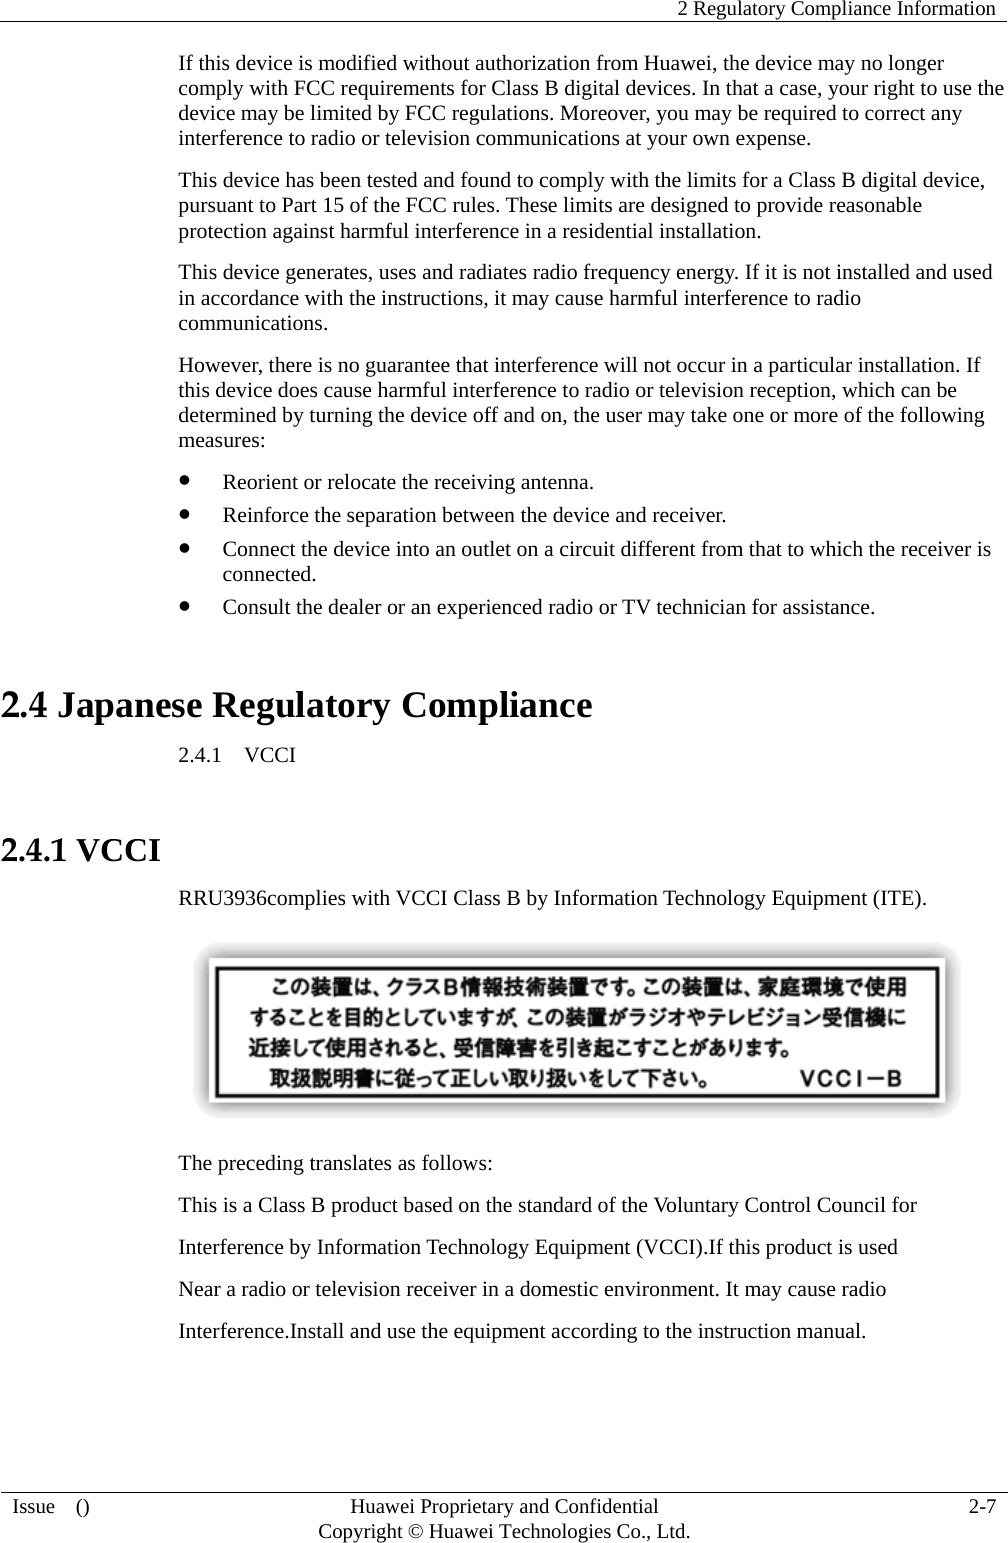    2 Regulatory Compliance Information   Issue  ()  Huawei Proprietary and Confidential     Copyright © Huawei Technologies Co., Ltd.  2-7  If this device is modified without authorization from Huawei, the device may no longer comply with FCC requirements for Class B digital devices. In that a case, your right to use the device may be limited by FCC regulations. Moreover, you may be required to correct any interference to radio or television communications at your own expense. This device has been tested and found to comply with the limits for a Class B digital device, pursuant to Part 15 of the FCC rules. These limits are designed to provide reasonable protection against harmful interference in a residential installation. This device generates, uses and radiates radio frequency energy. If it is not installed and used in accordance with the instructions, it may cause harmful interference to radio communications. However, there is no guarantee that interference will not occur in a particular installation. If this device does cause harmful interference to radio or television reception, which can be determined by turning the device off and on, the user may take one or more of the following measures:  Reorient or relocate the receiving antenna.  Reinforce the separation between the device and receiver.  Connect the device into an outlet on a circuit different from that to which the receiver is connected.  Consult the dealer or an experienced radio or TV technician for assistance. 2.4 Japanese Regulatory Compliance 2.4.1  VCCI  2.4.1 VCCI RRU3936complies with VCCI Class B by Information Technology Equipment (ITE).  The preceding translates as follows: This is a Class B product based on the standard of the Voluntary Control Council for Interference by Information Technology Equipment (VCCI).If this product is used Near a radio or television receiver in a domestic environment. It may cause radio Interference.Install and use the equipment according to the instruction manual.   